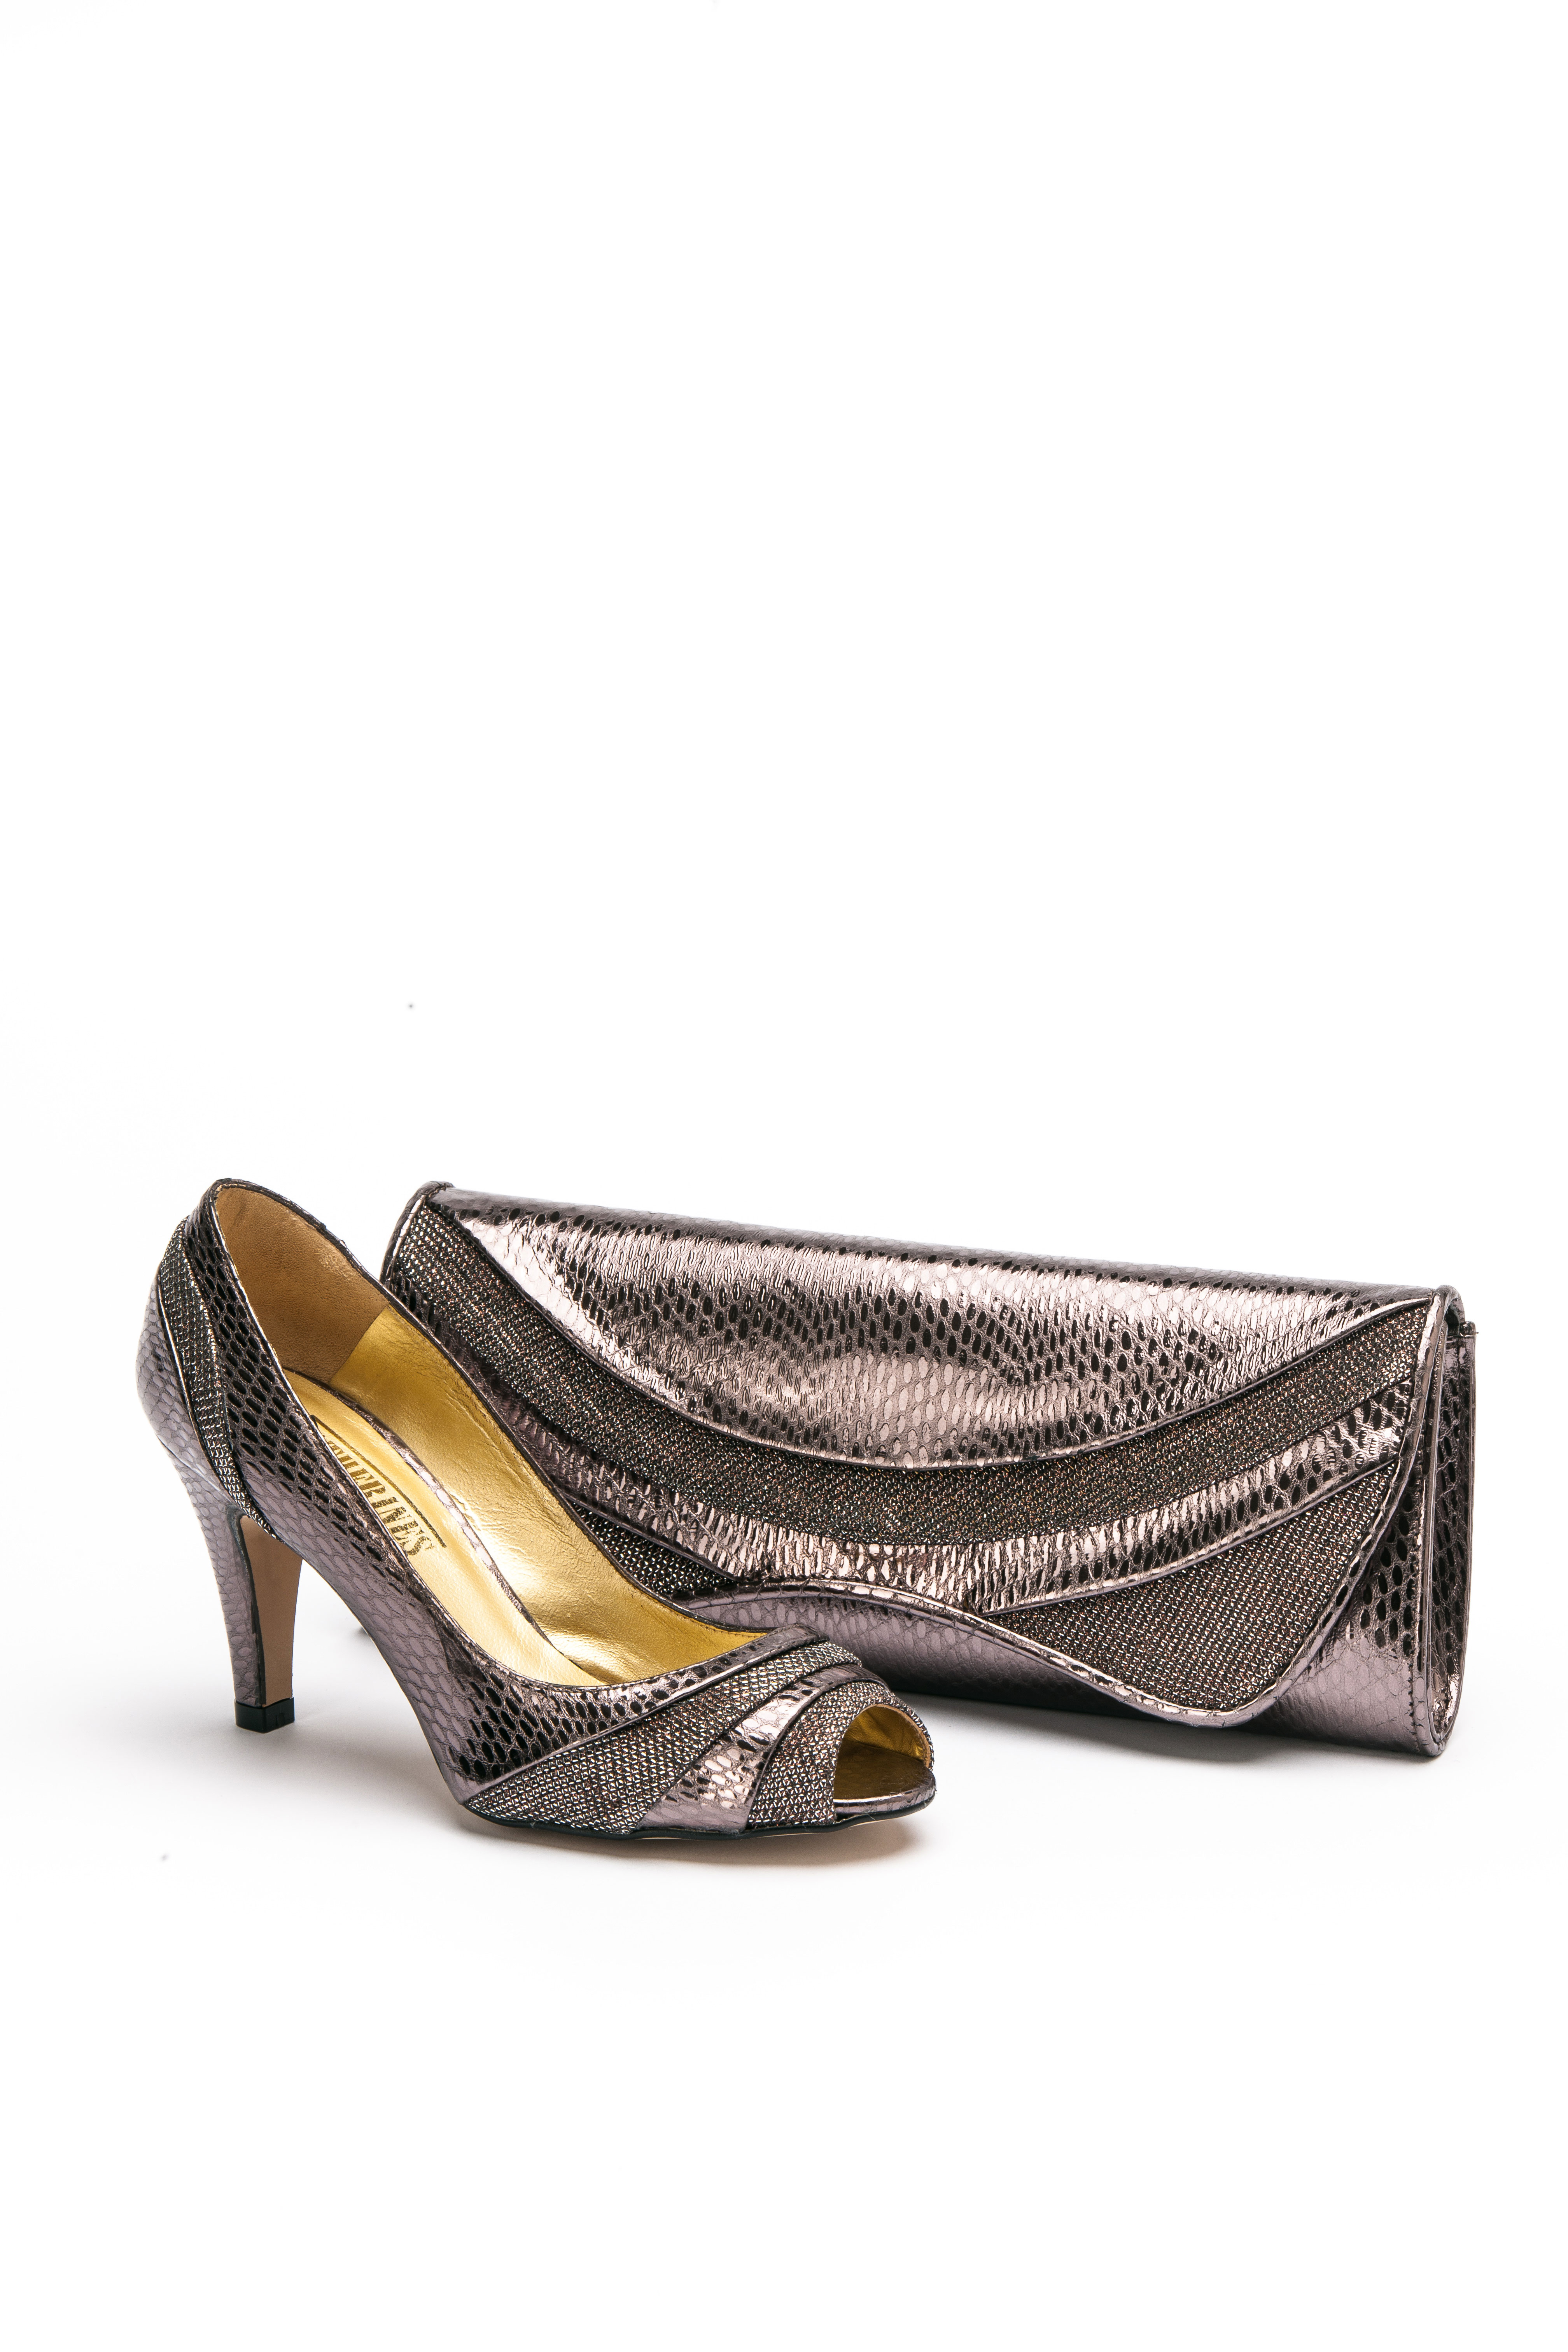 pewter shoes and matching bag